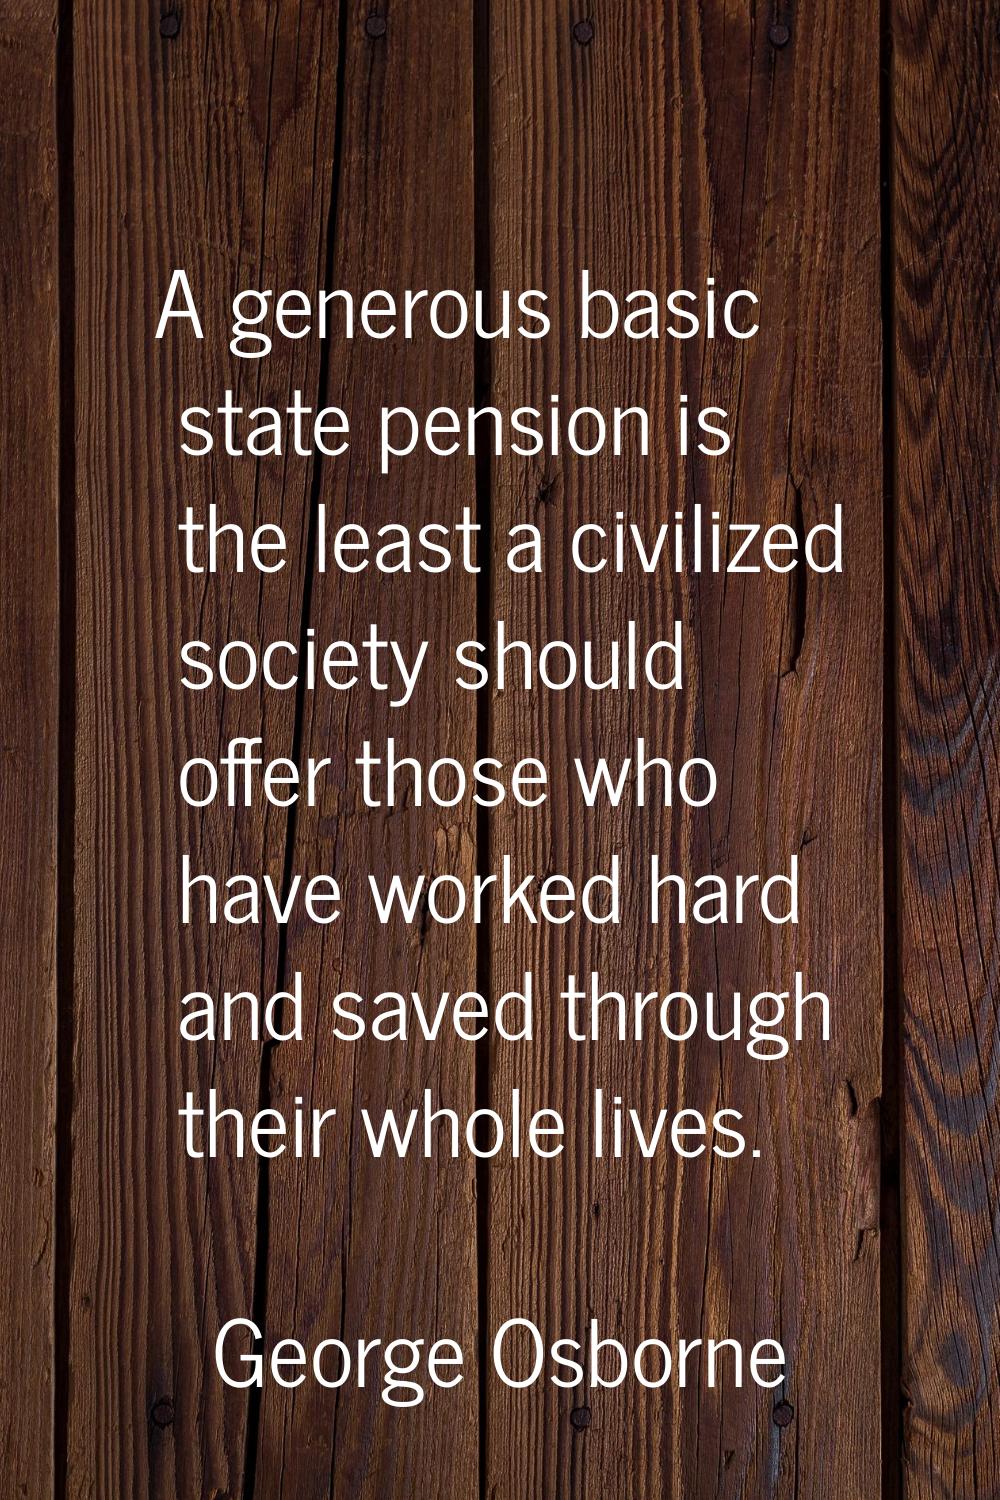 A generous basic state pension is the least a civilized society should offer those who have worked 